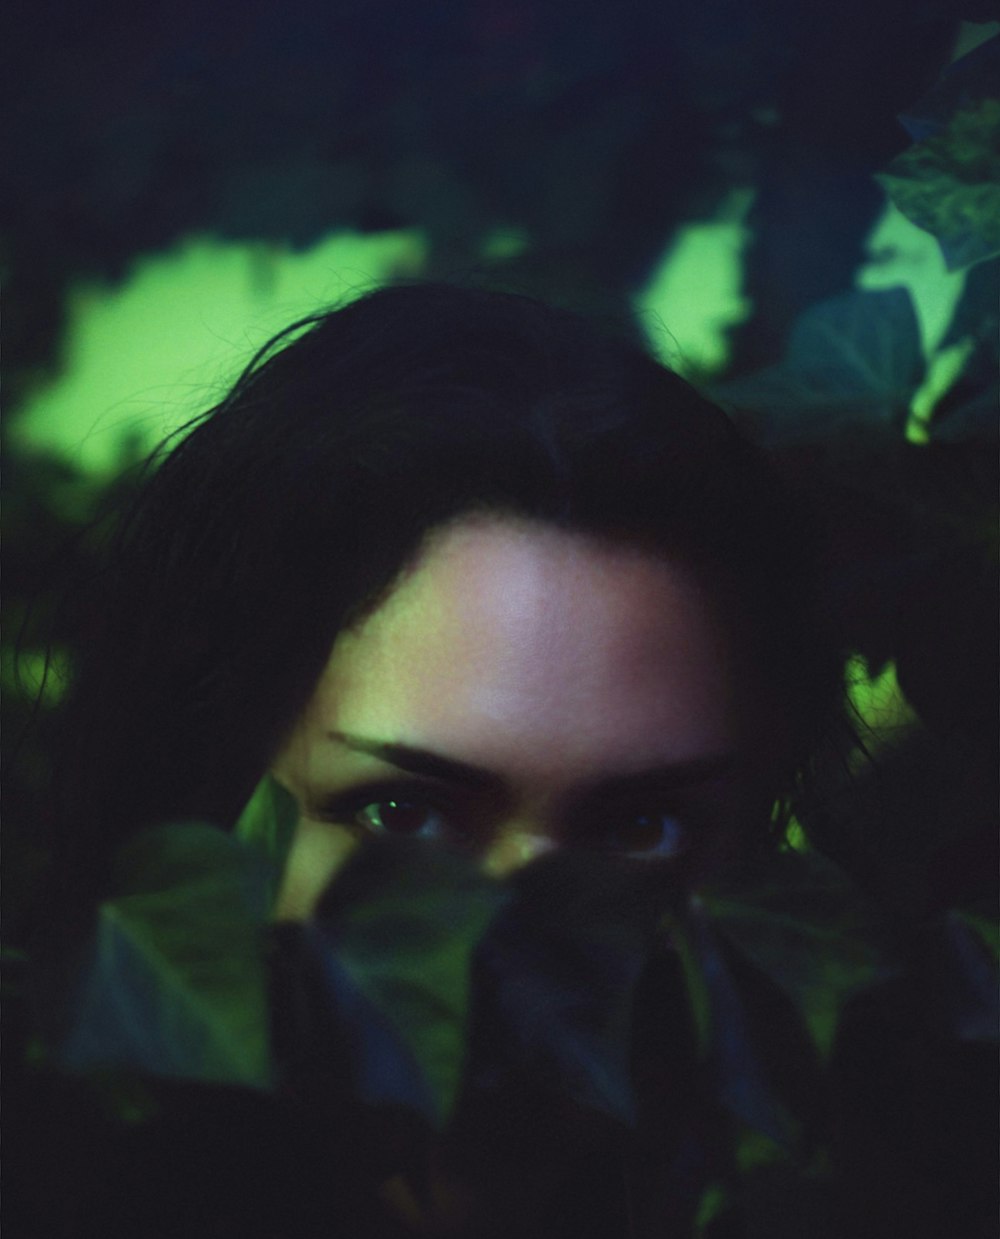 a woman's face is seen through the leaves of a tree